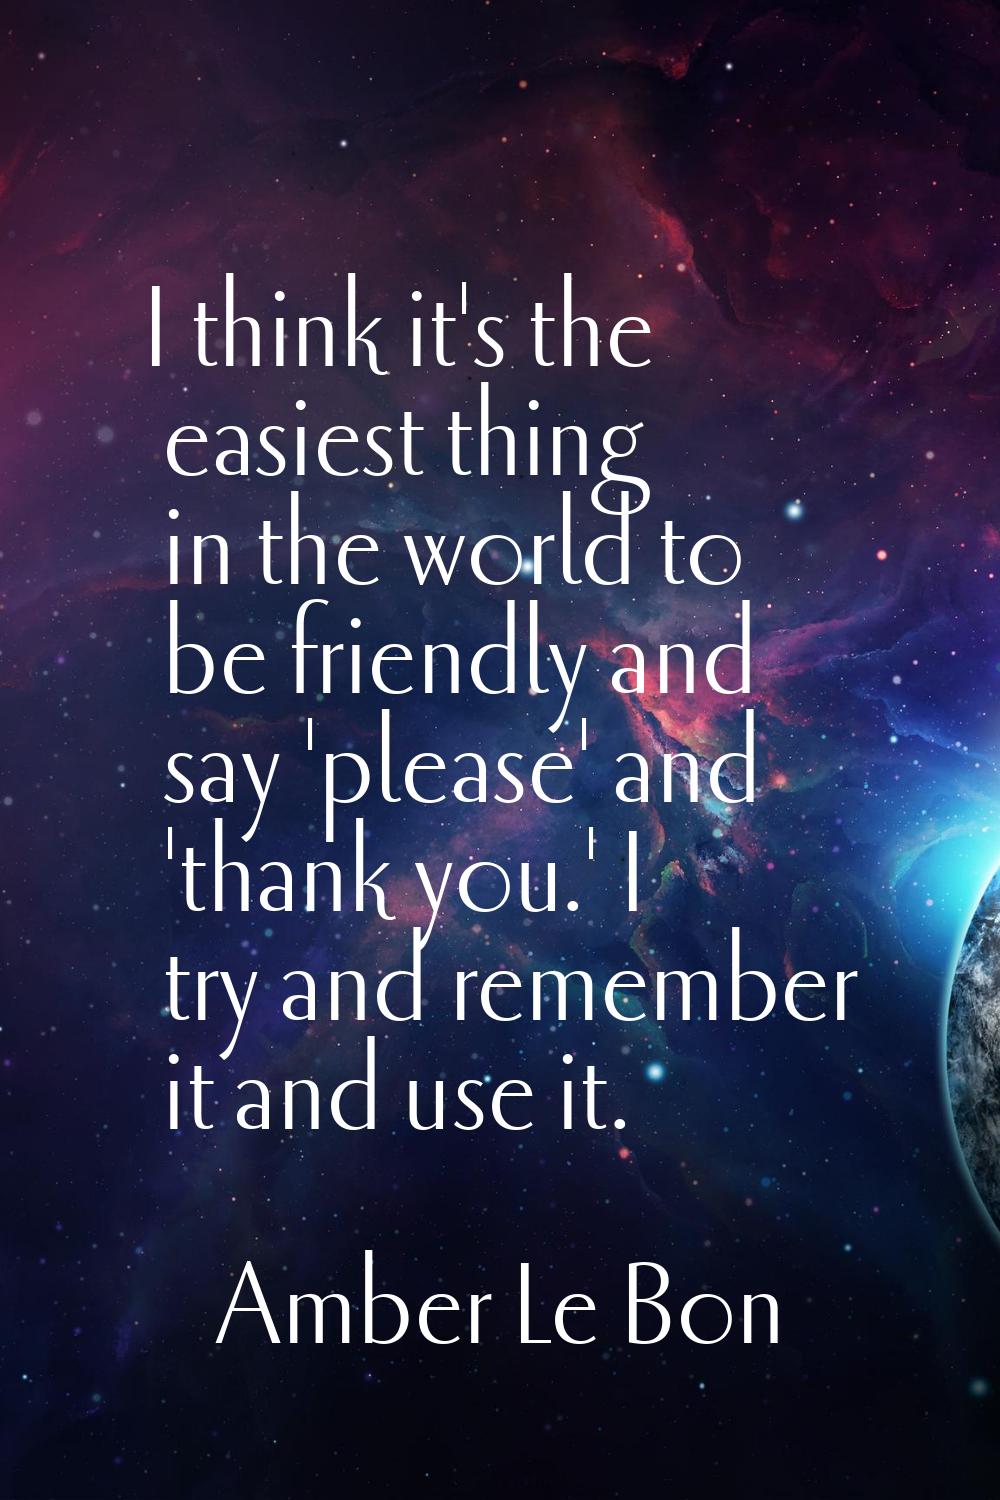 I think it's the easiest thing in the world to be friendly and say 'please' and 'thank you.' I try 